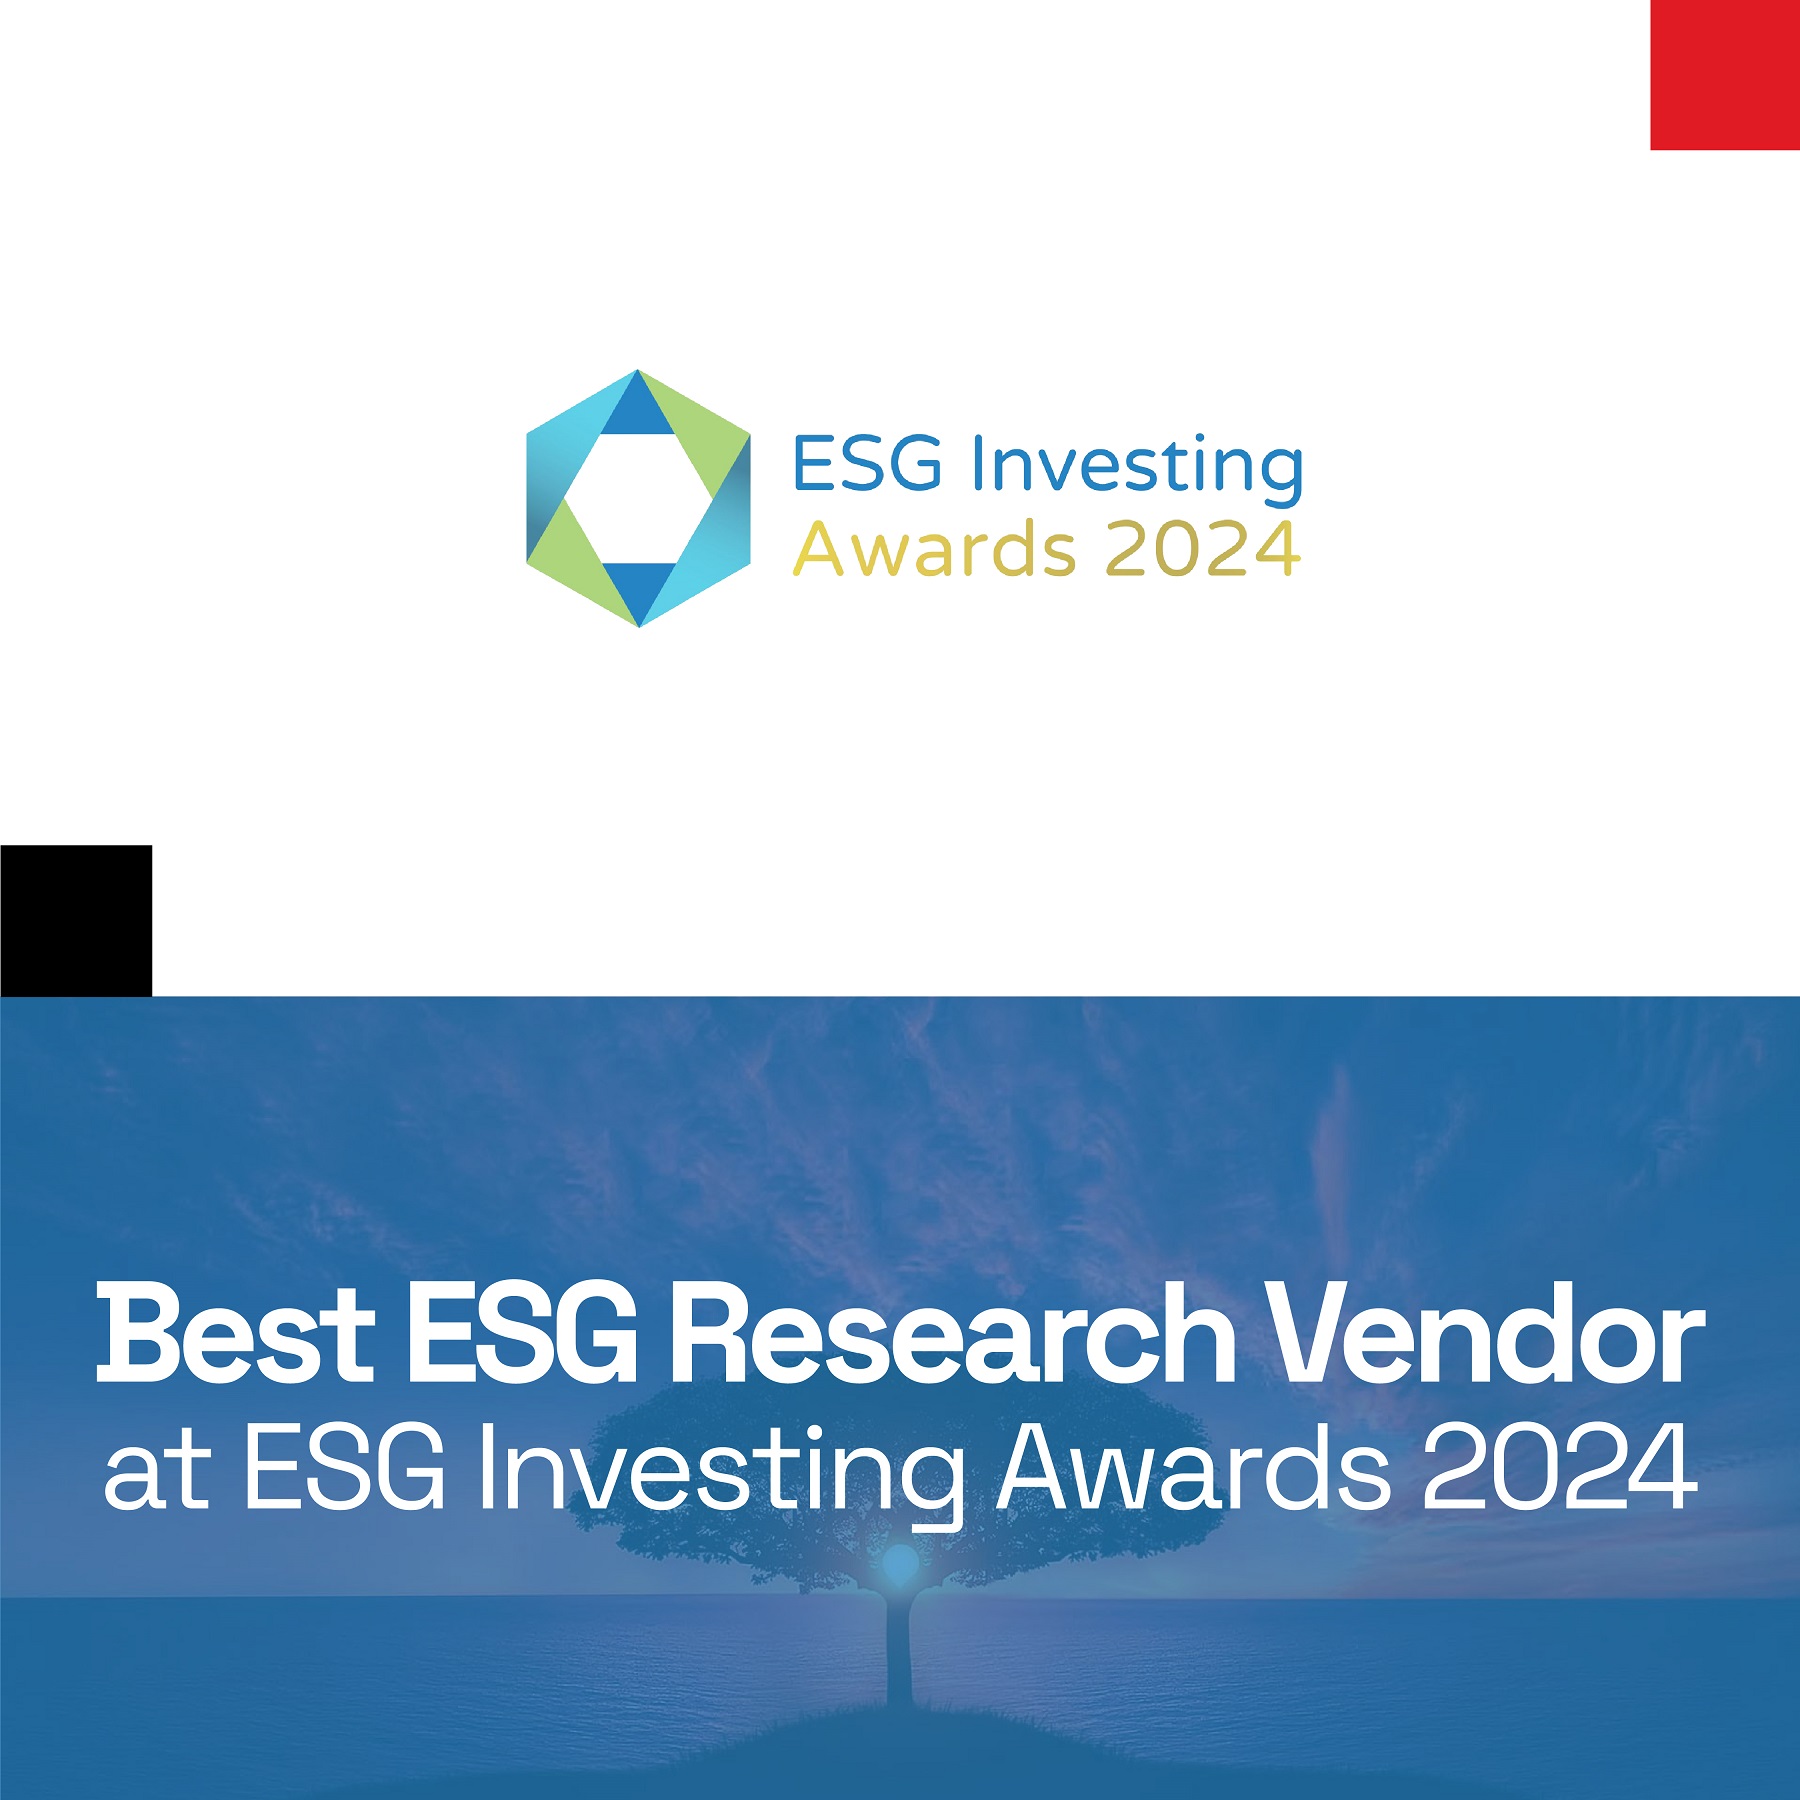 SG Analytics is the Best ESG Research Vendor at ESG Investing Awards 2024 - banner